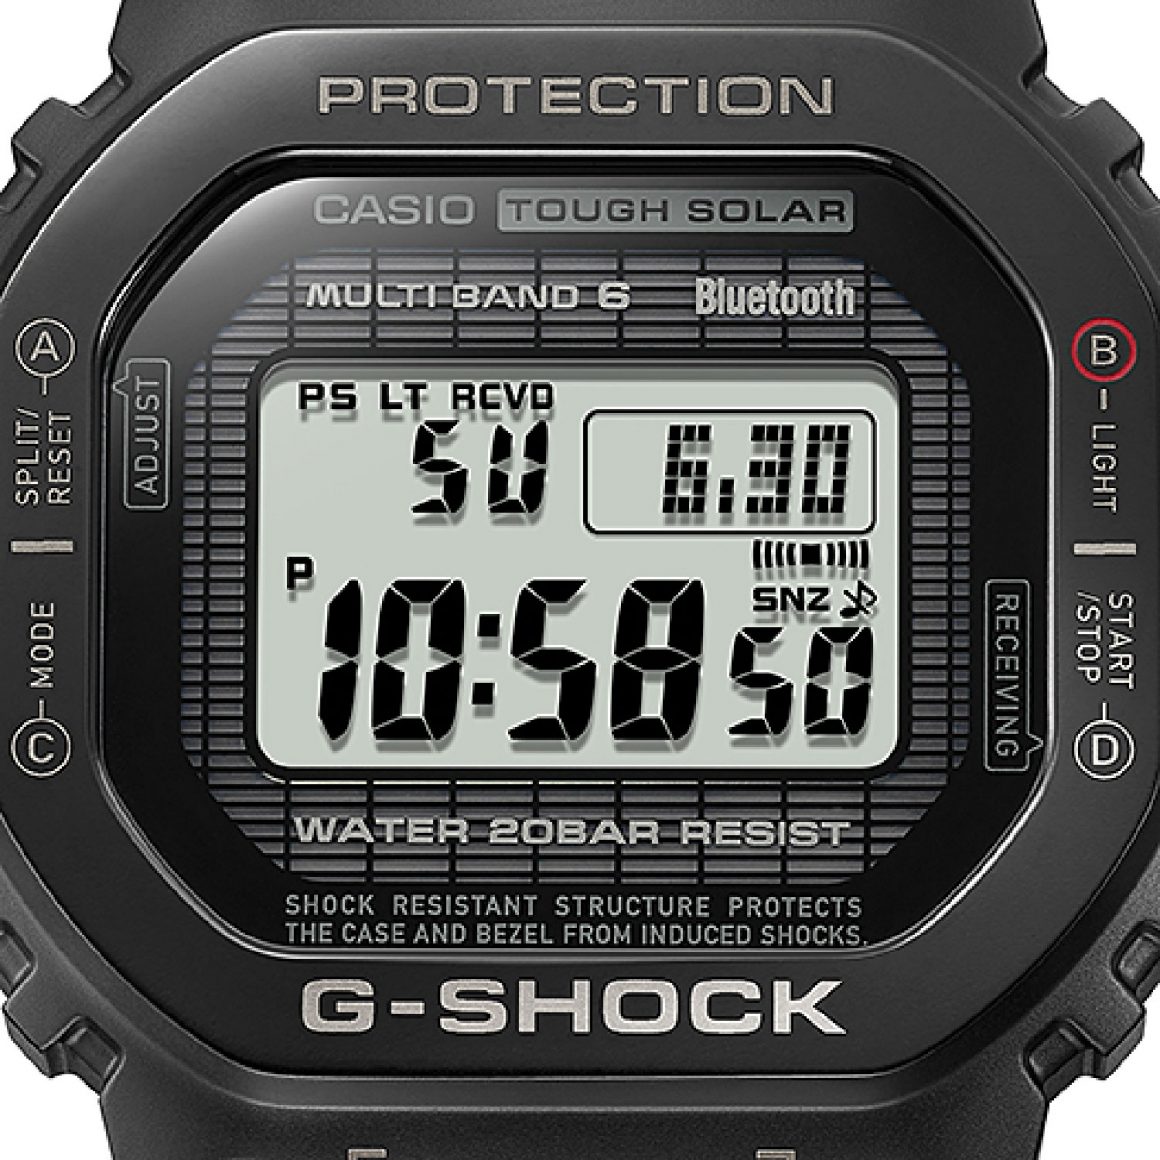 G-SHOCK Unveils the New Full Metal GMW-B5000TVA